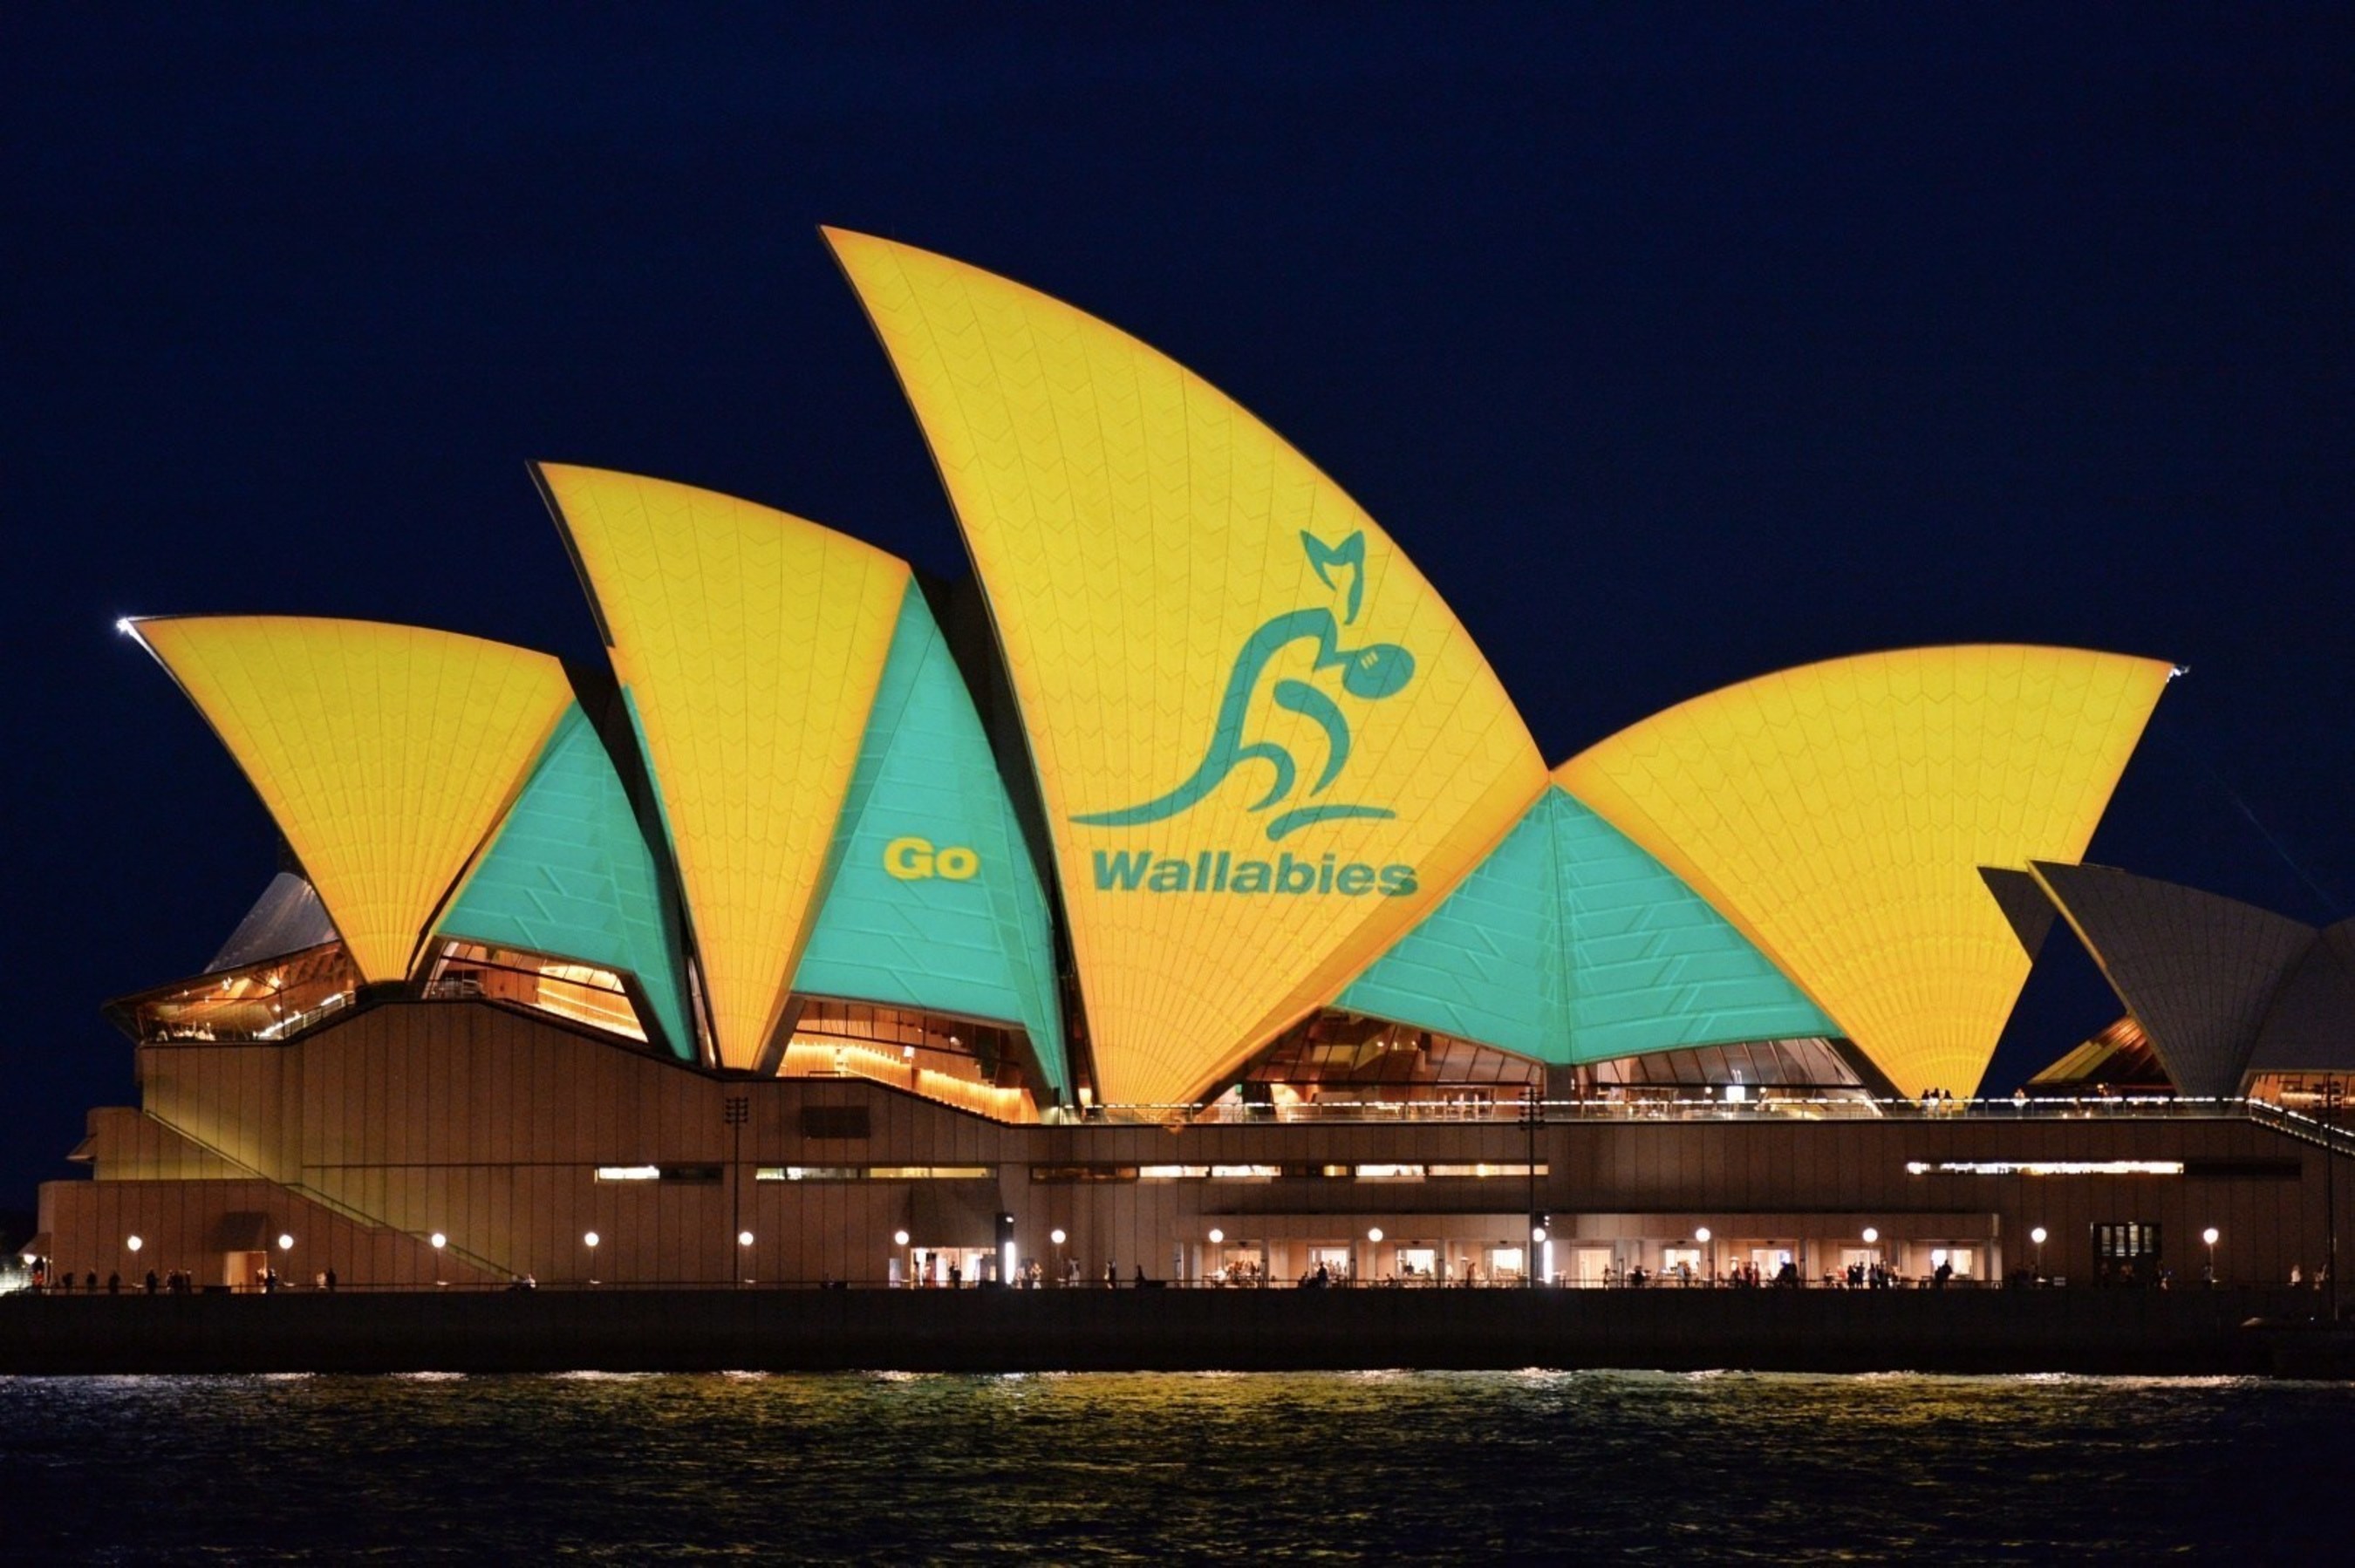 Sydney cheers on the Wallabies on the Sails of the Sydney Opera House_Destination NSW James Morgan (1)